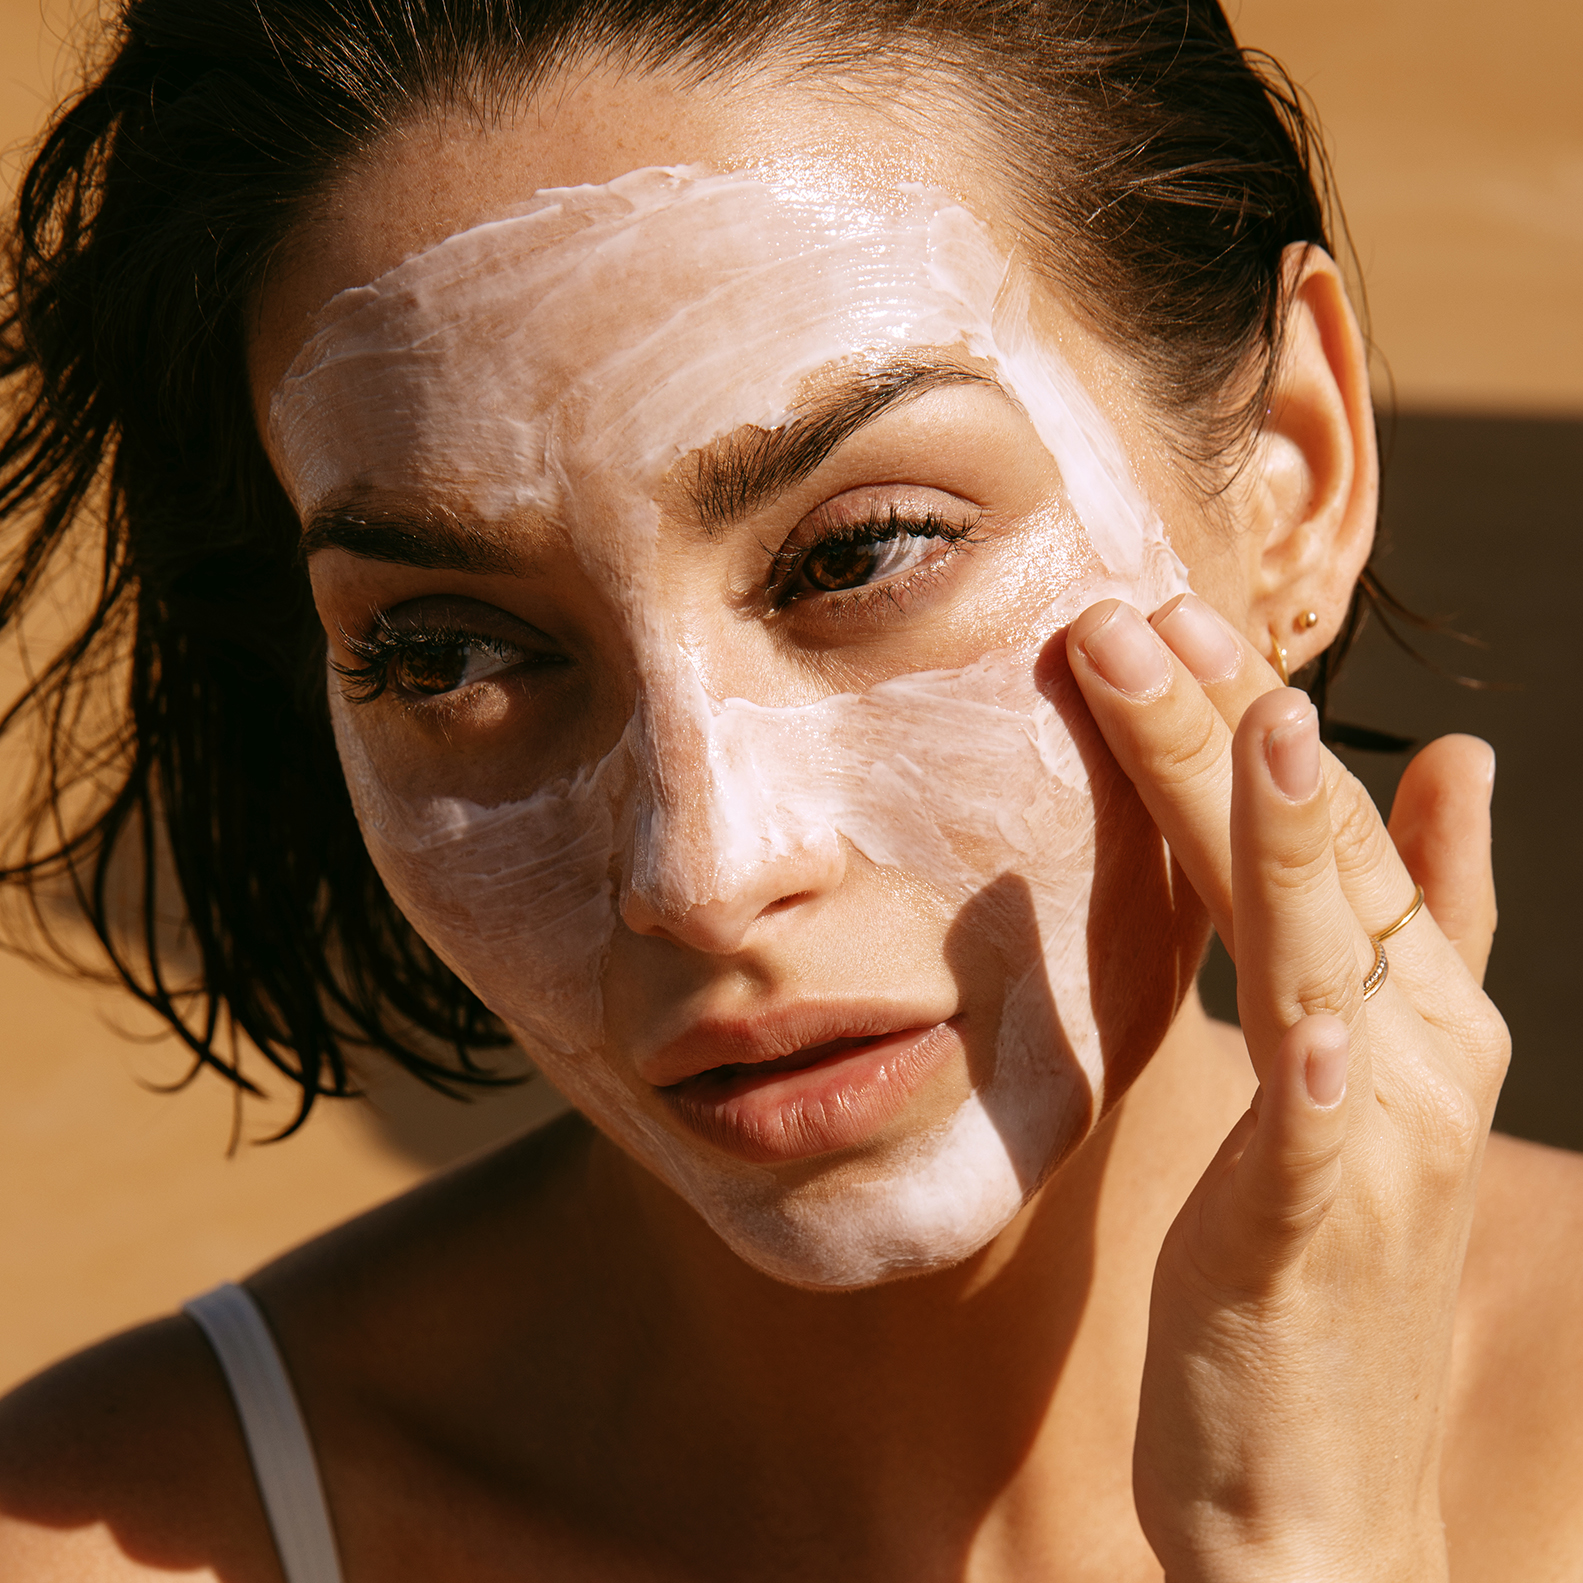 Cream Mask For Face: Is This The Key To Better Skin? | PORTER